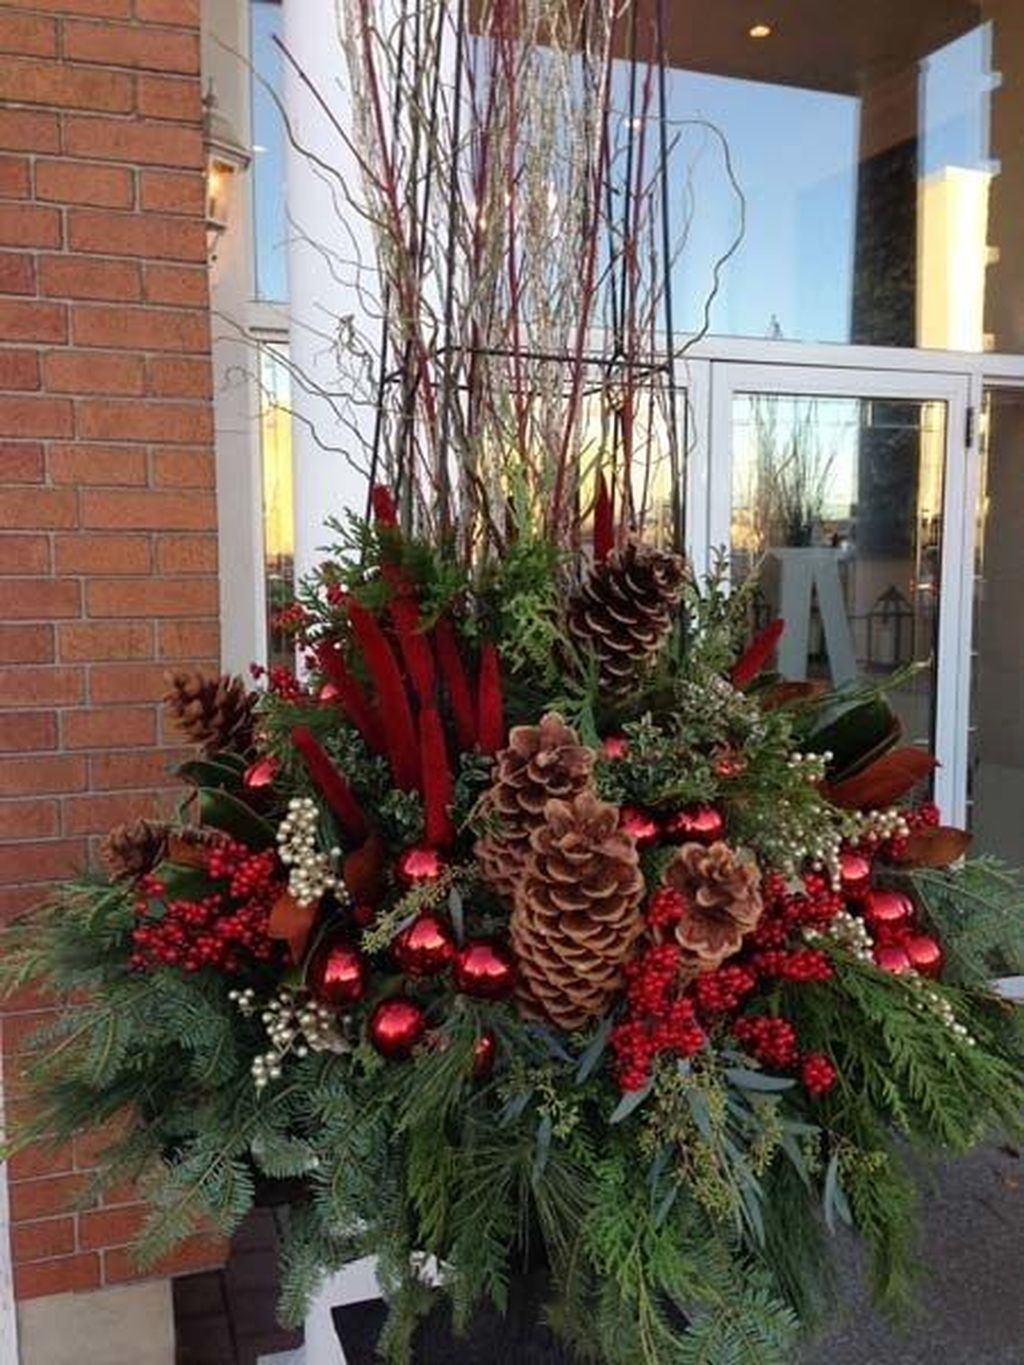 Marvelous Outdoor Holiday Planter Ideas To Beauty Porch Décor 15